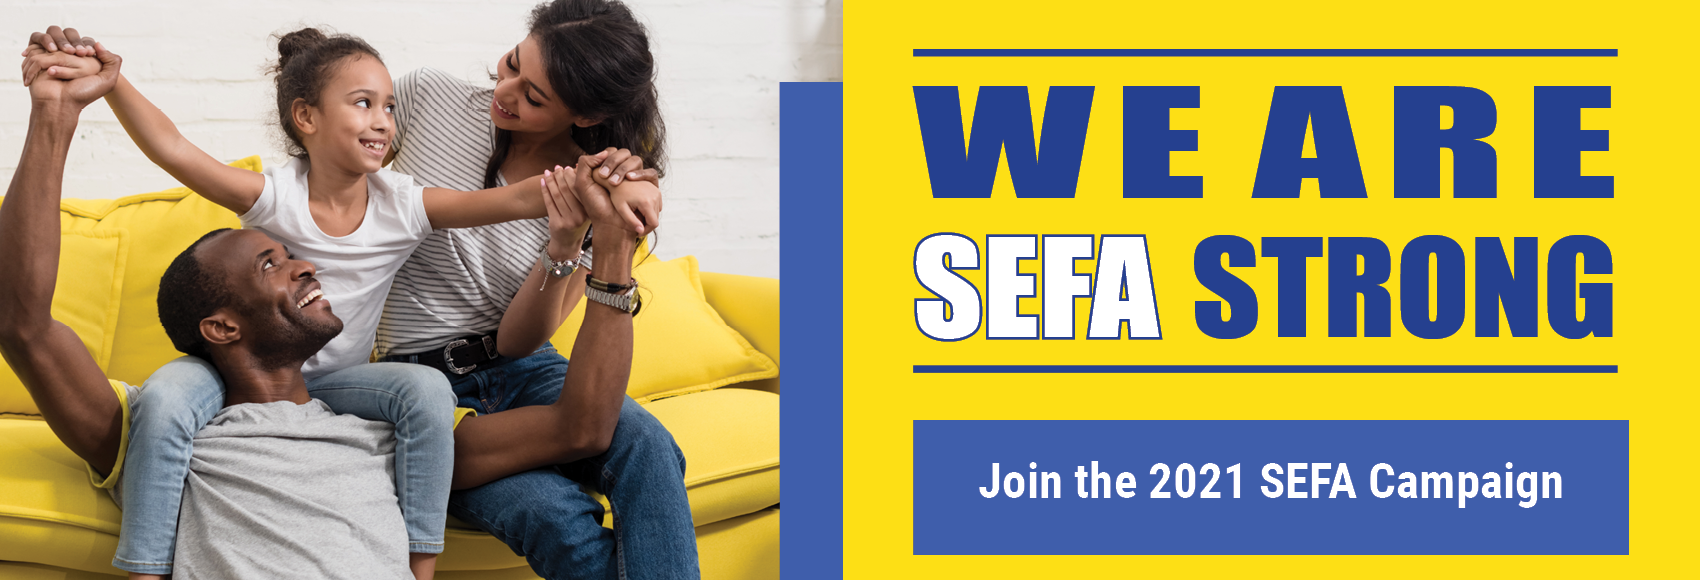 A man, woman, and child smiling and sitting on a couch, with the words "We are SEFA Strong. Join the 2021 SEFA Campaign."